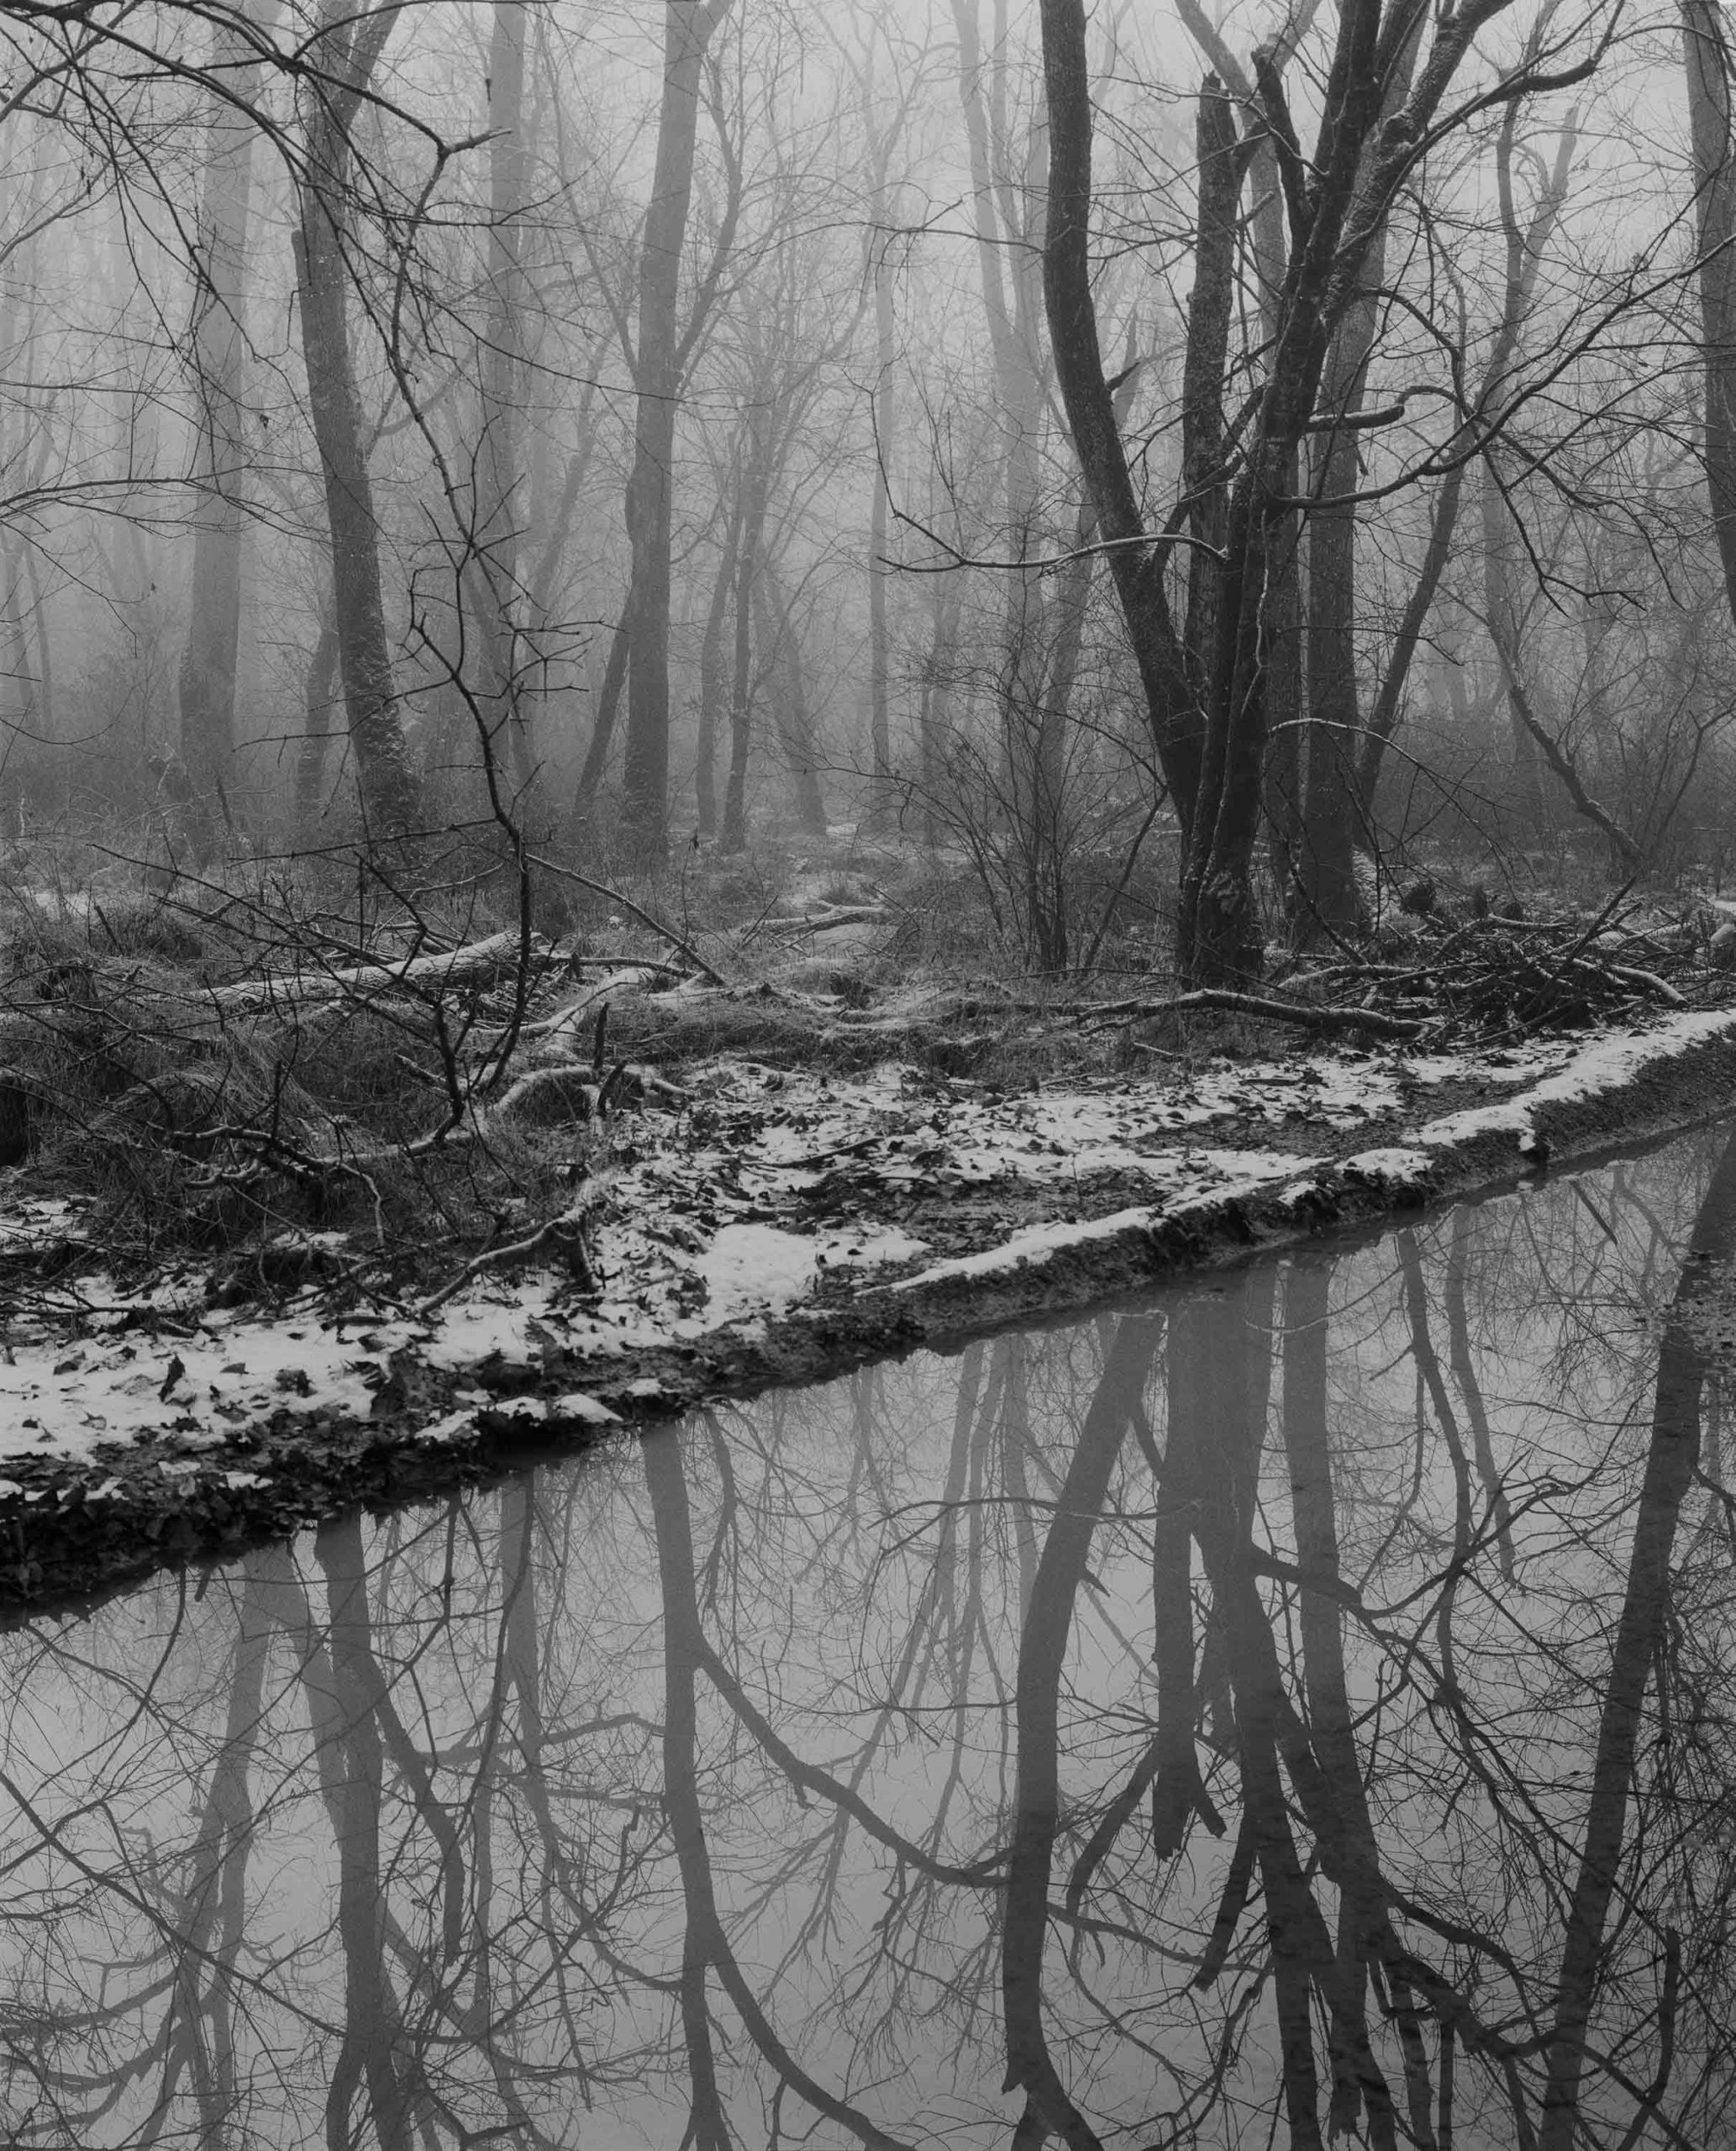  Matt Eich, Untitled, Charlottesville, Virginia, 2020, from Bird Song Over Black Water (2015–ongoing)